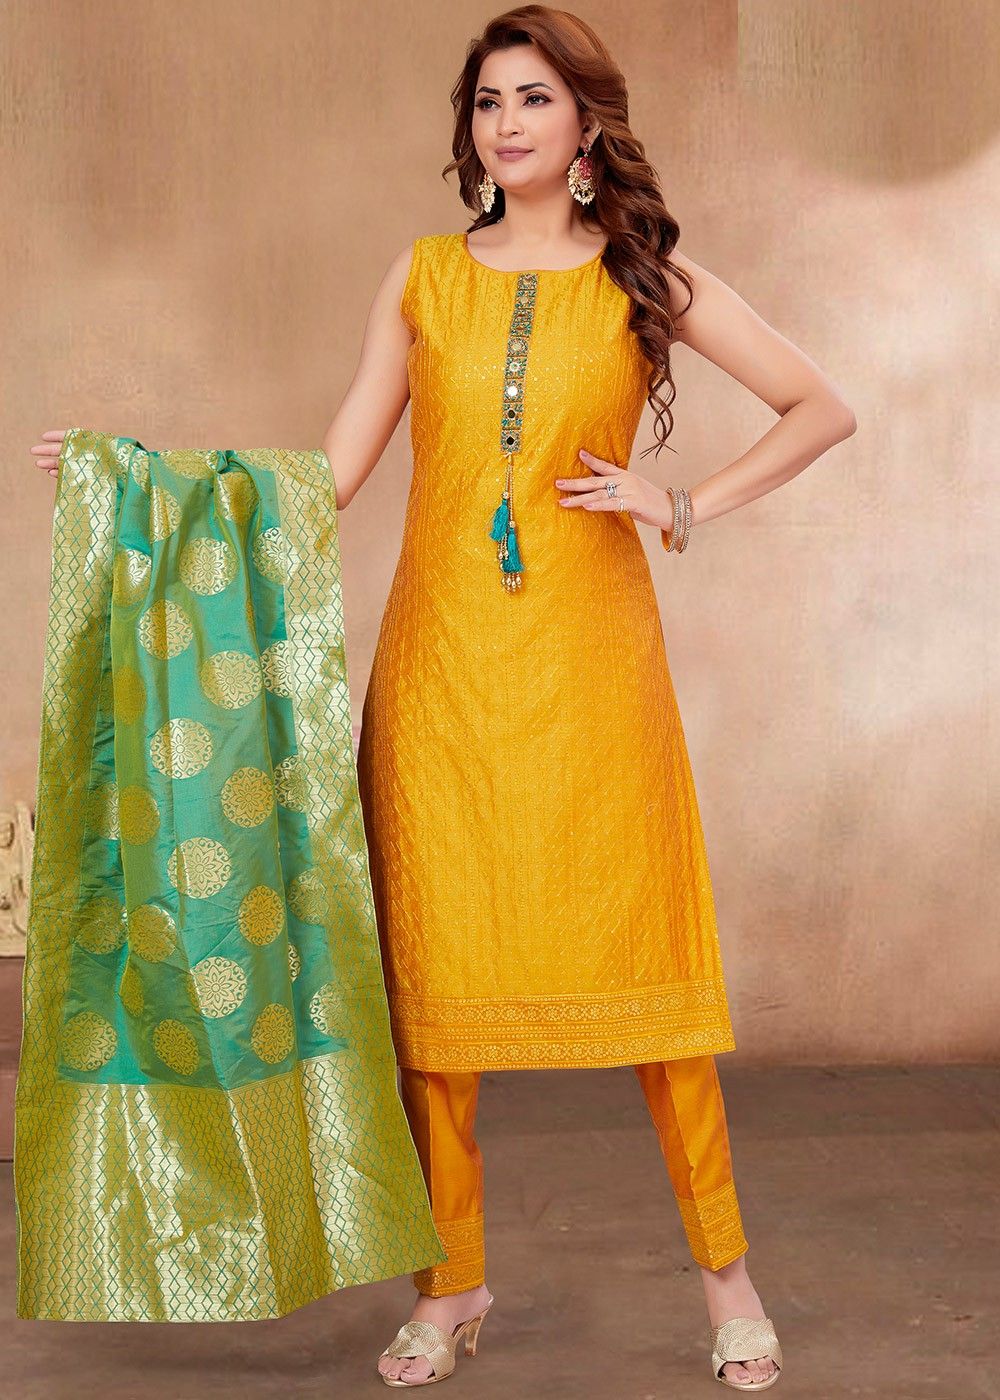 Top more than 200 dupatta with yellow suit best